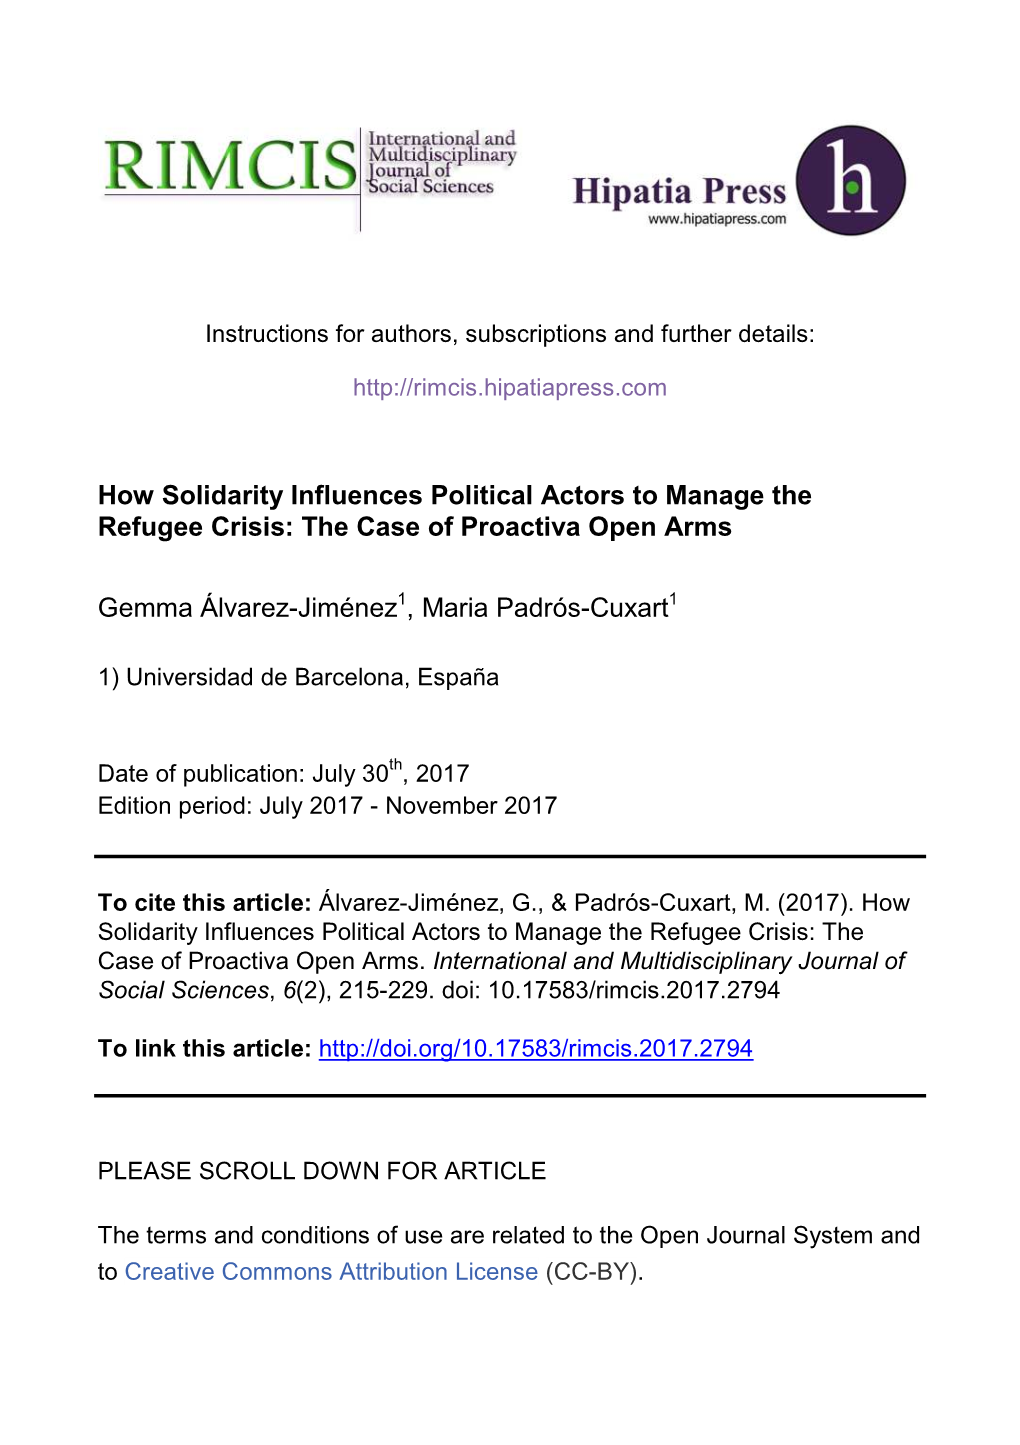 How Solidarity Influences Political Actors to Manage the Refugee Crisis: the Case of Proactiva Open Arms